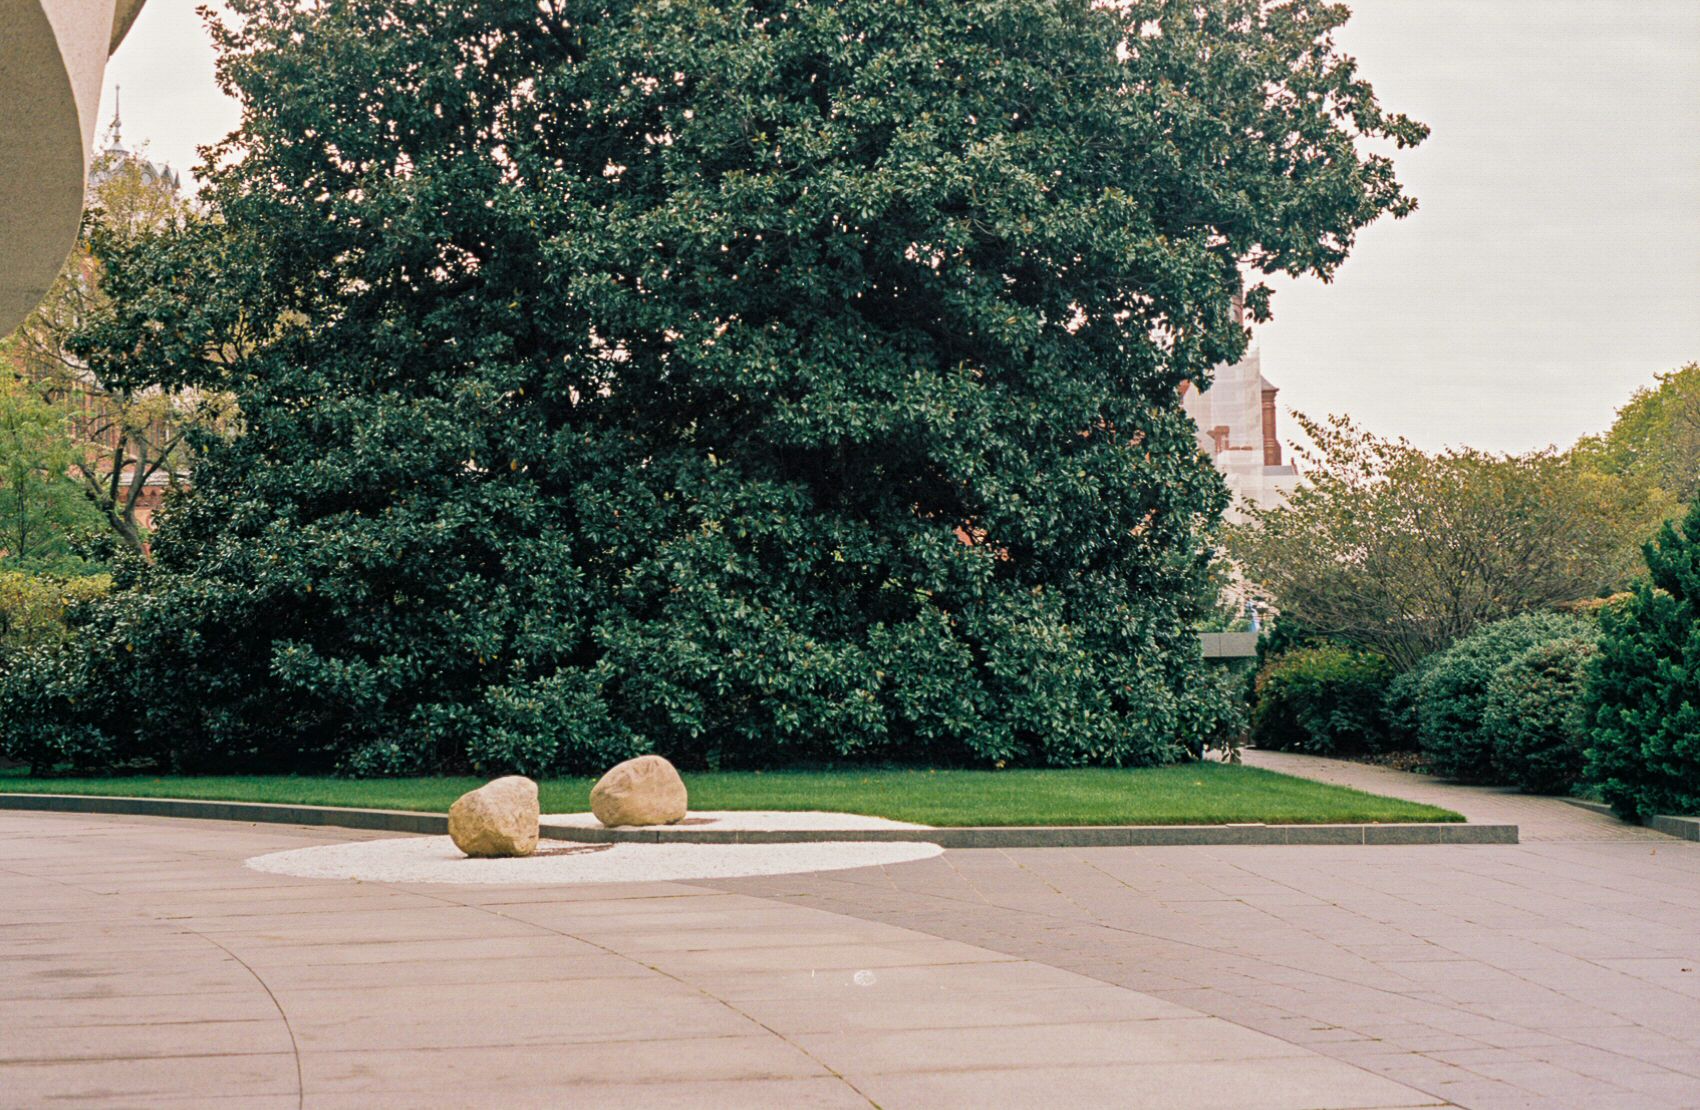 A sculpture (two rocks) in the courtyard next to the Hirshhorn Museum in Washington, DC.